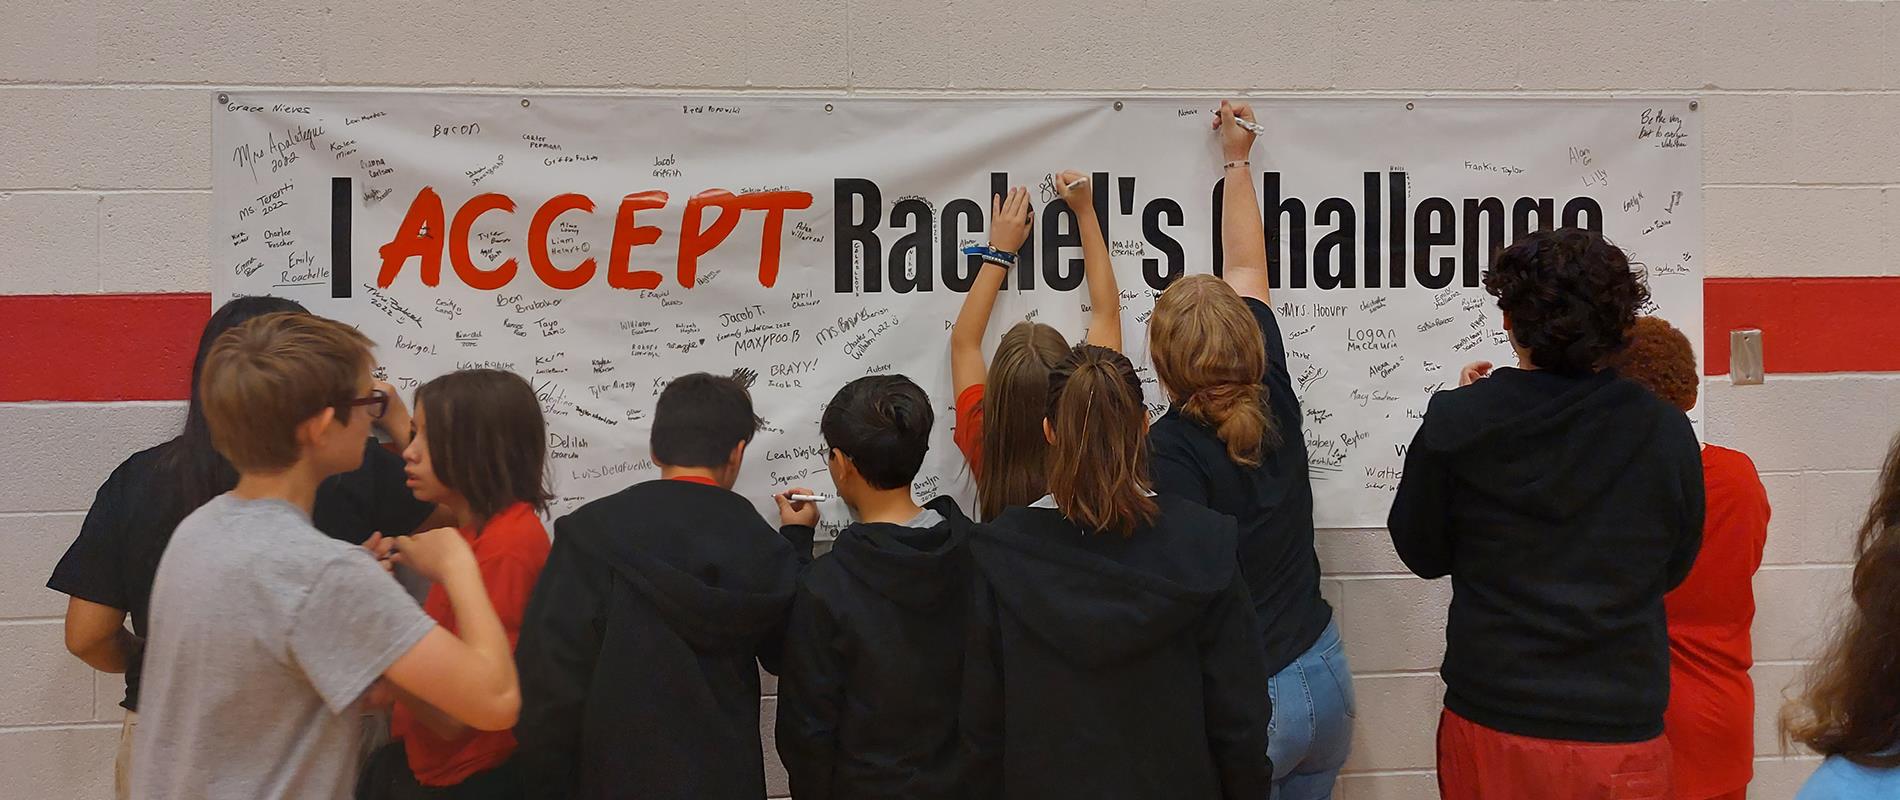 Students signing the Rachel's Challenge banner after presentation